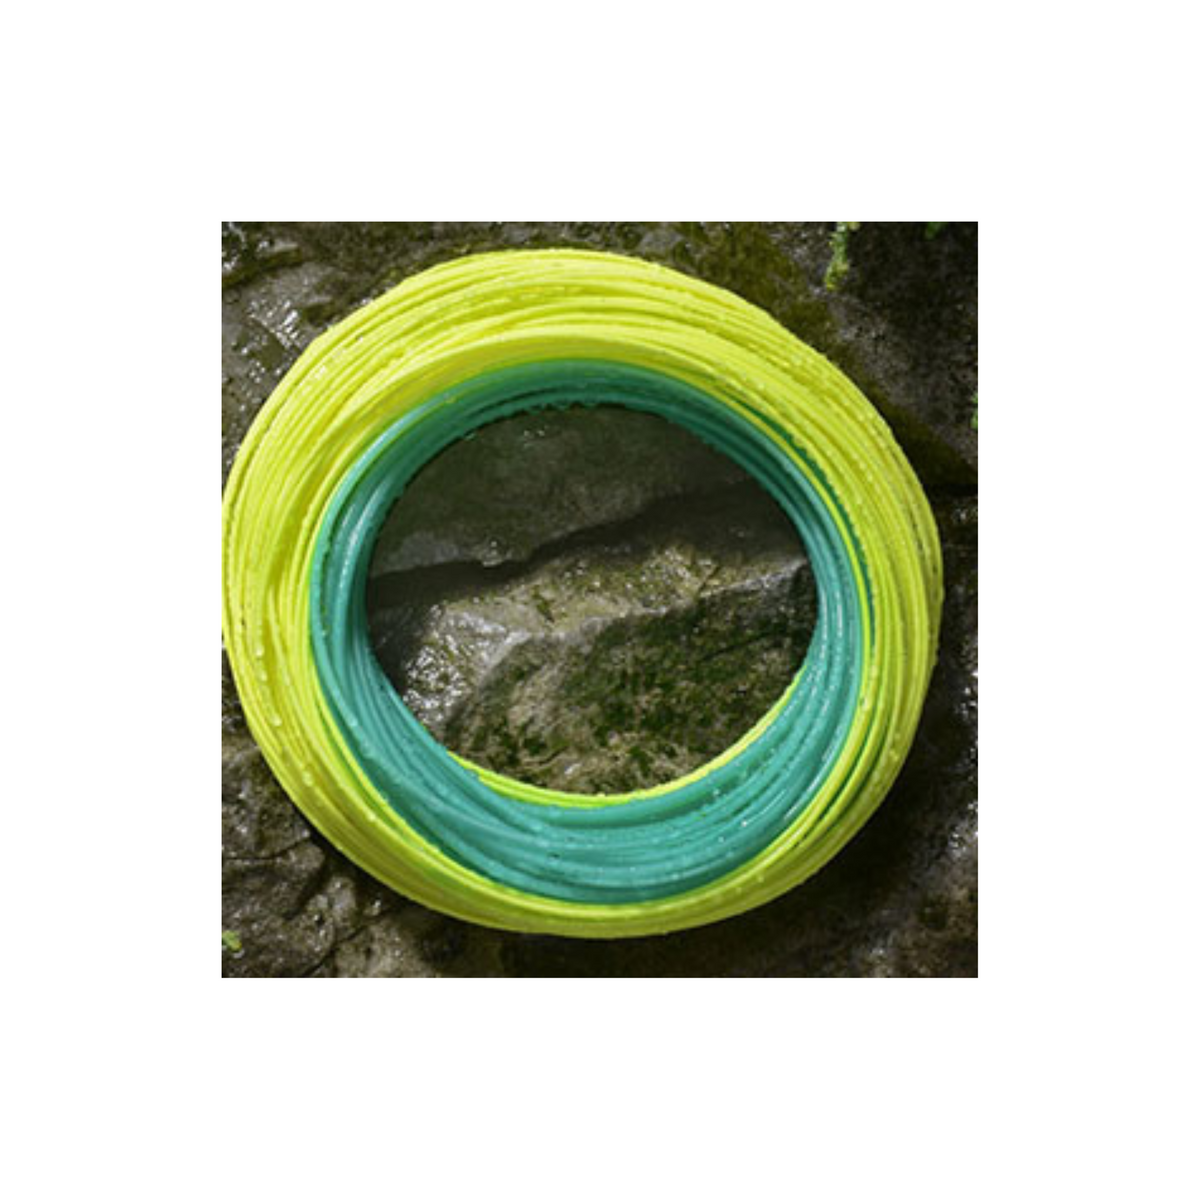 Royal Wulff Triangle Taper Floating Trout Fly Fishing Line